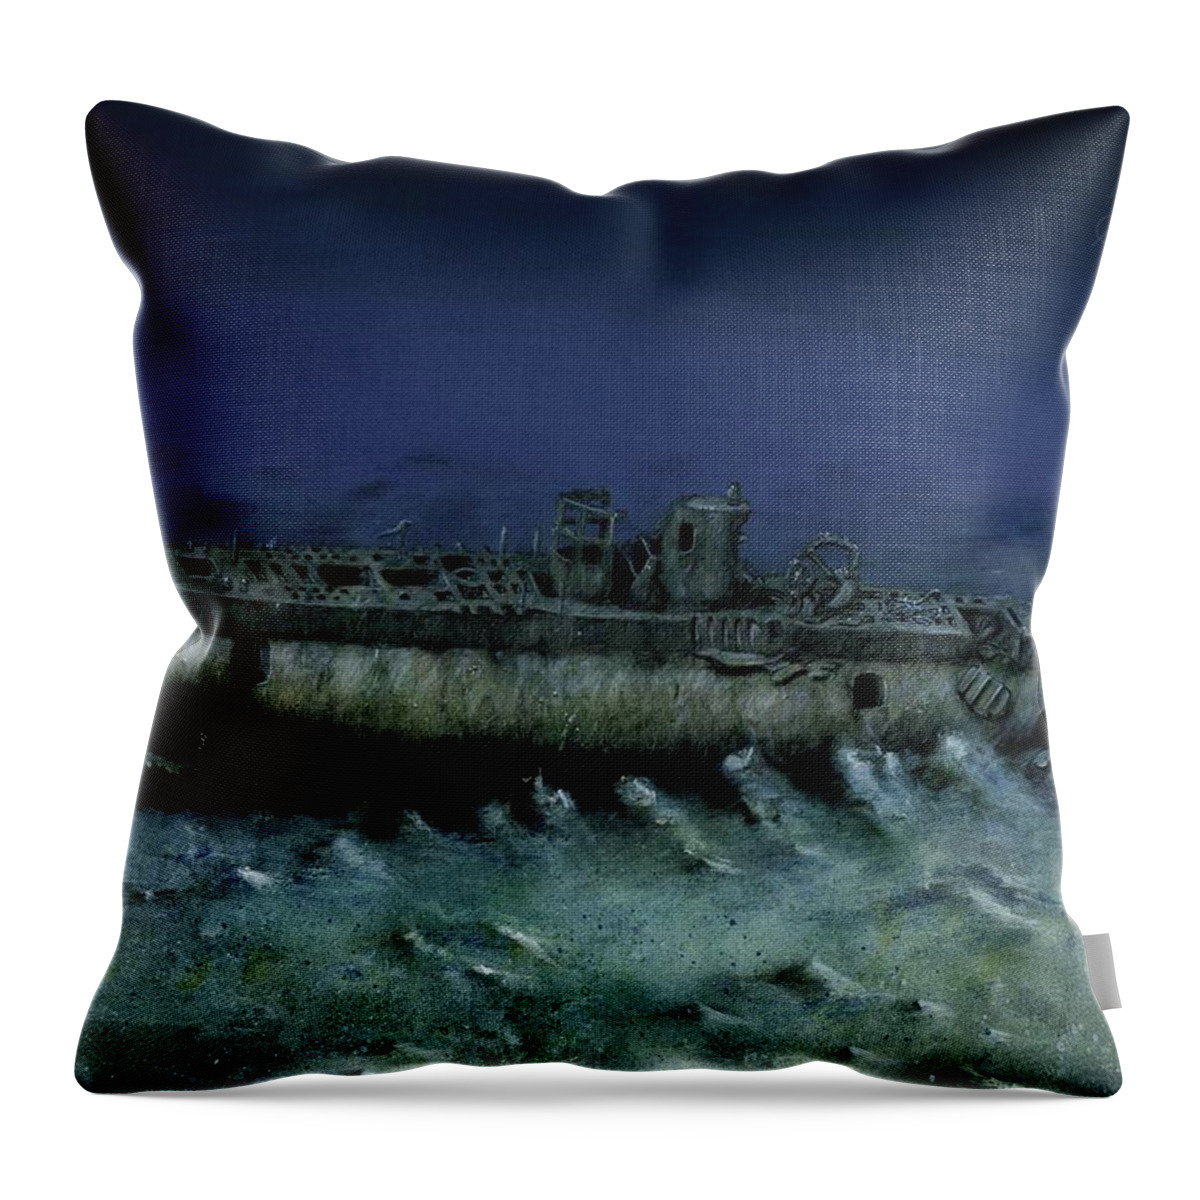 Wreck Throw Pillow featuring the digital art French submarine Rubis Wreck by Andrea Gatti